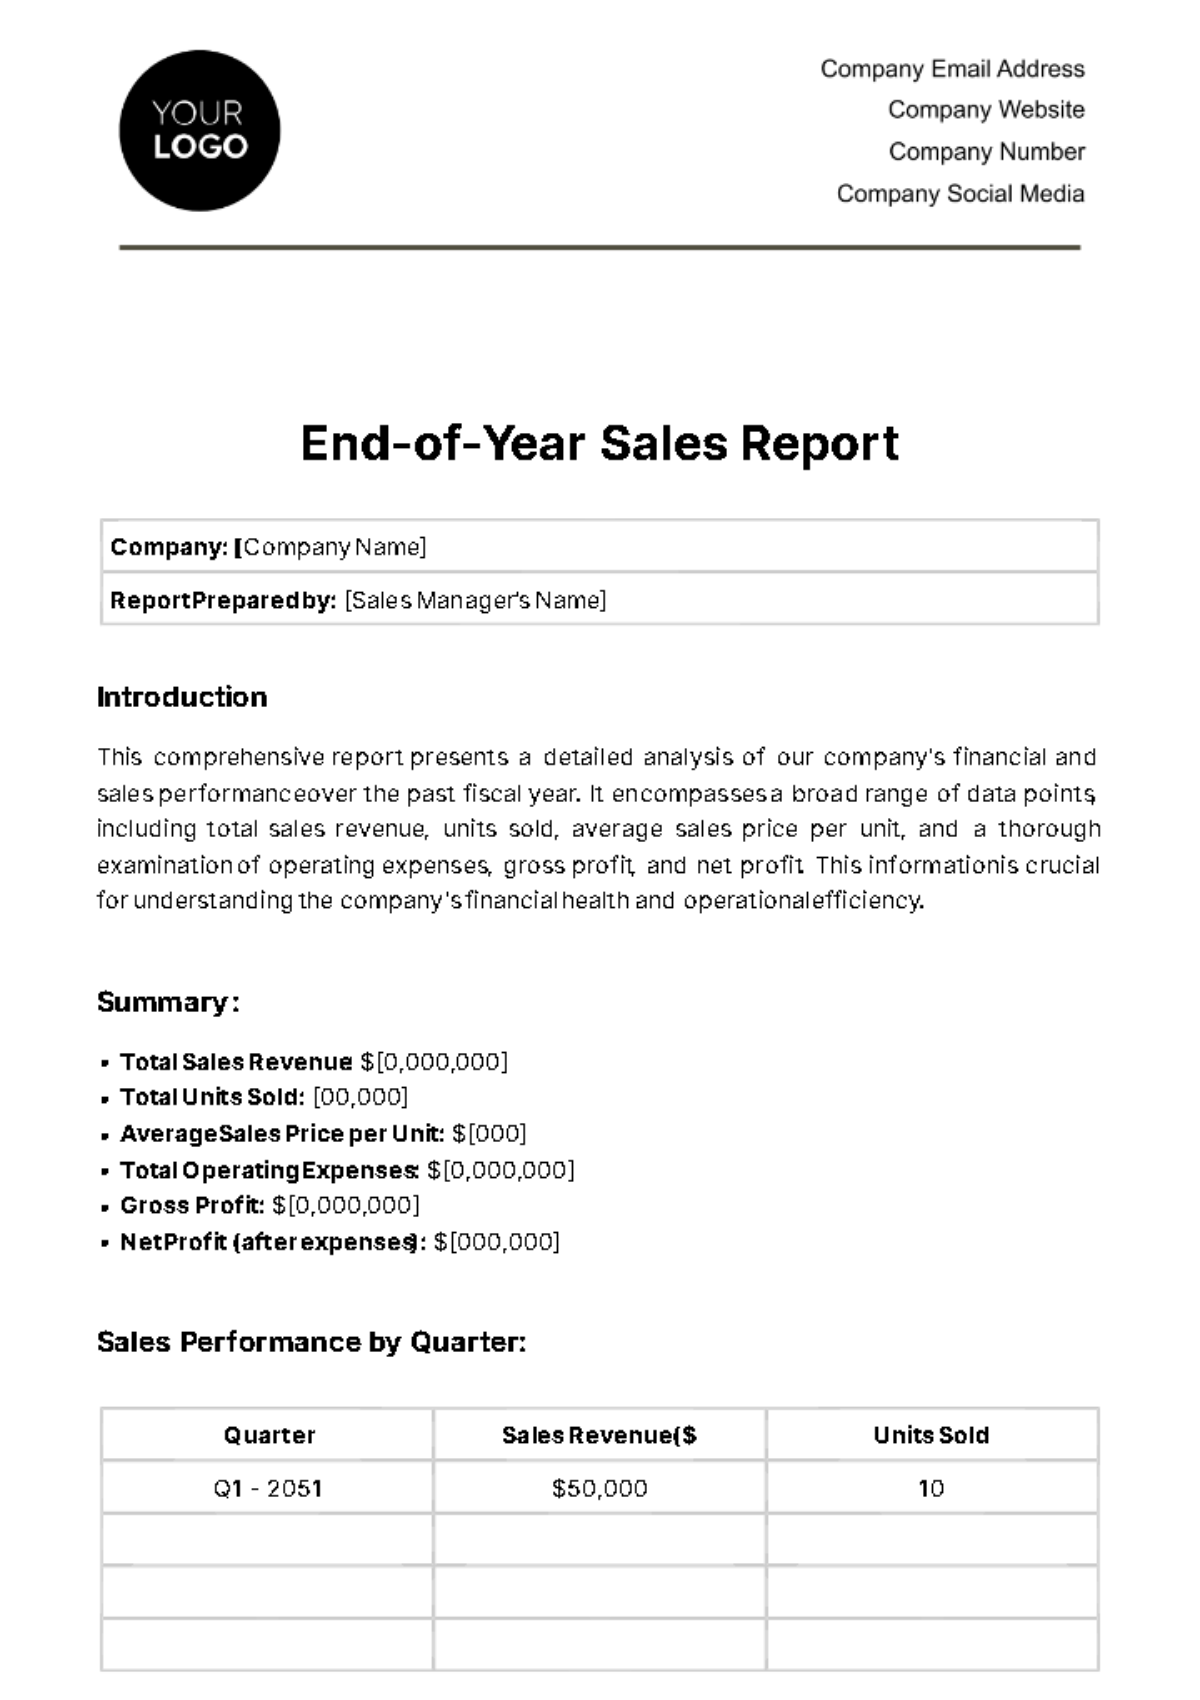 Free End-of-Year Sales Report Template